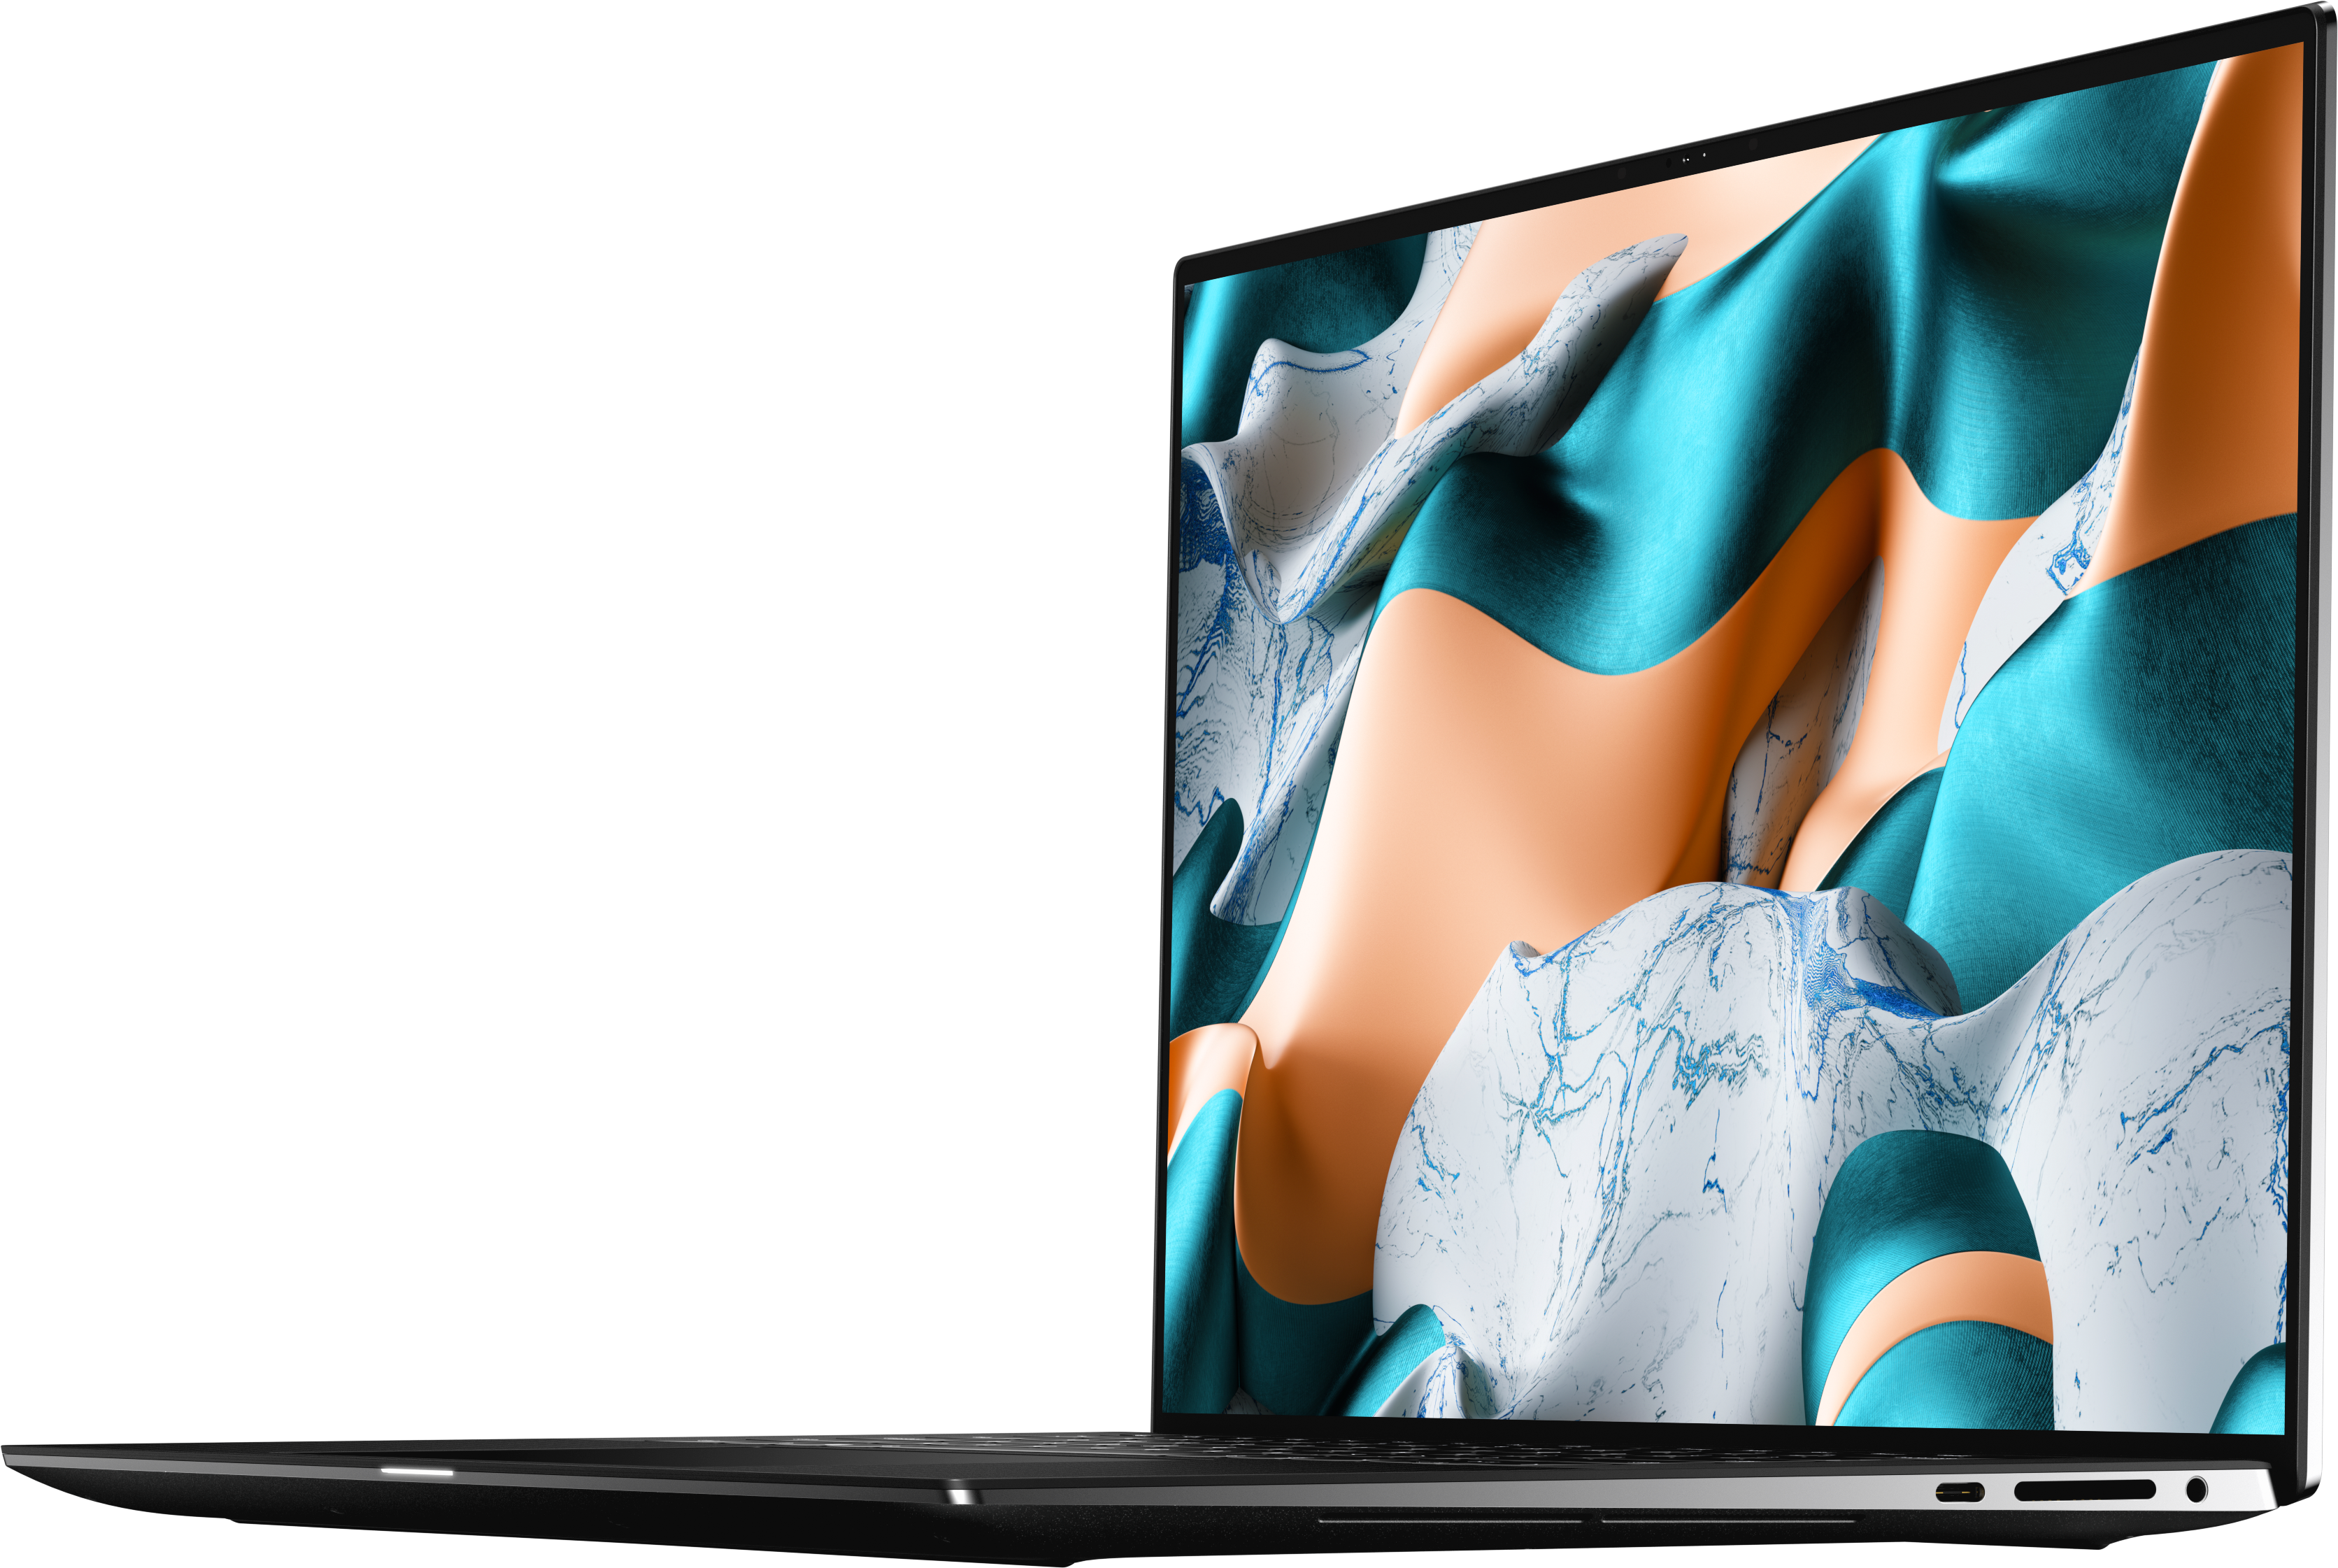 Dell XPS 9500 (2020